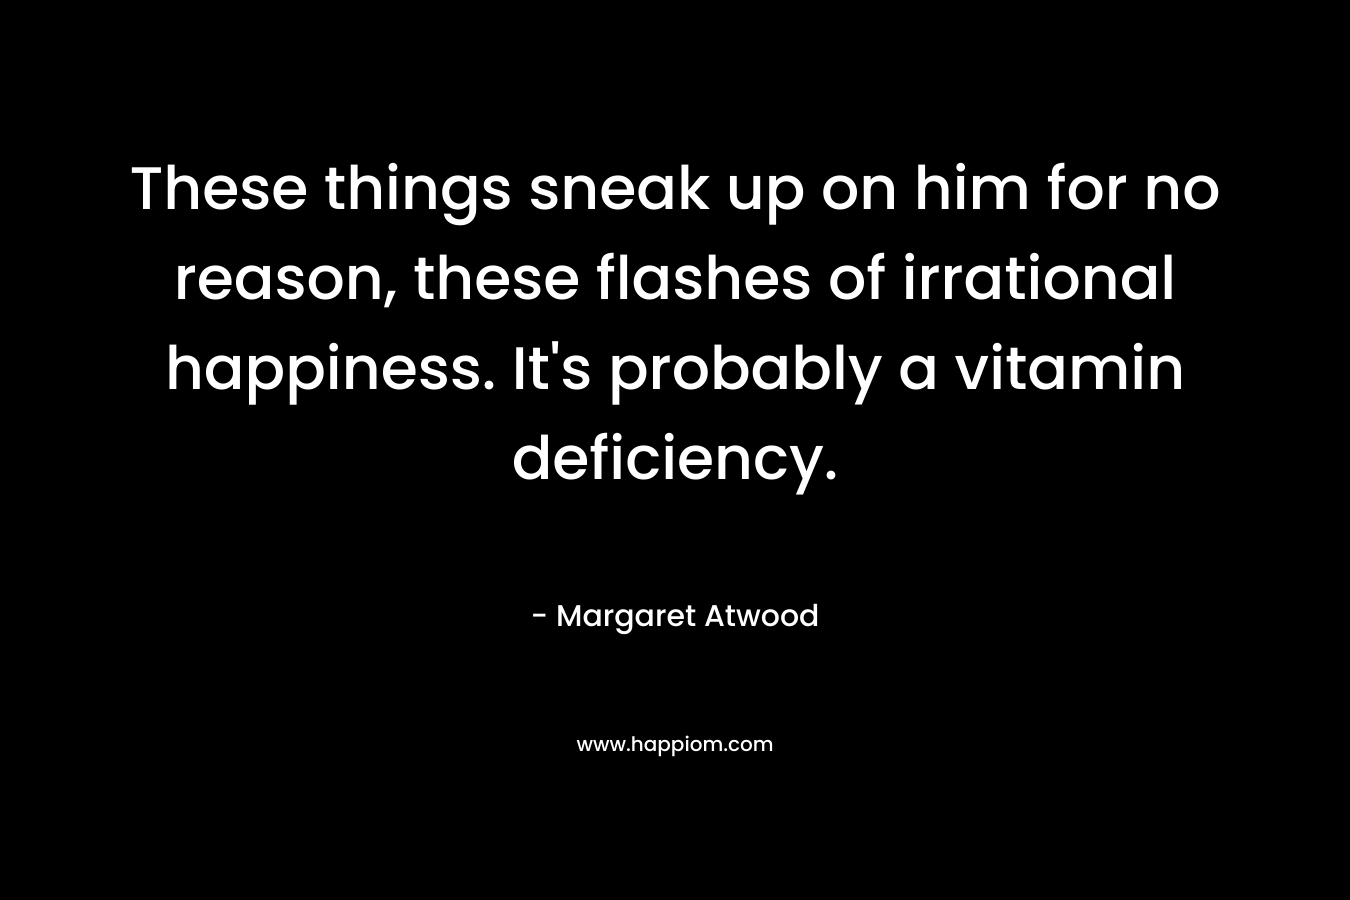 These things sneak up on him for no reason, these flashes of irrational happiness. It’s probably a vitamin deficiency. – Margaret Atwood